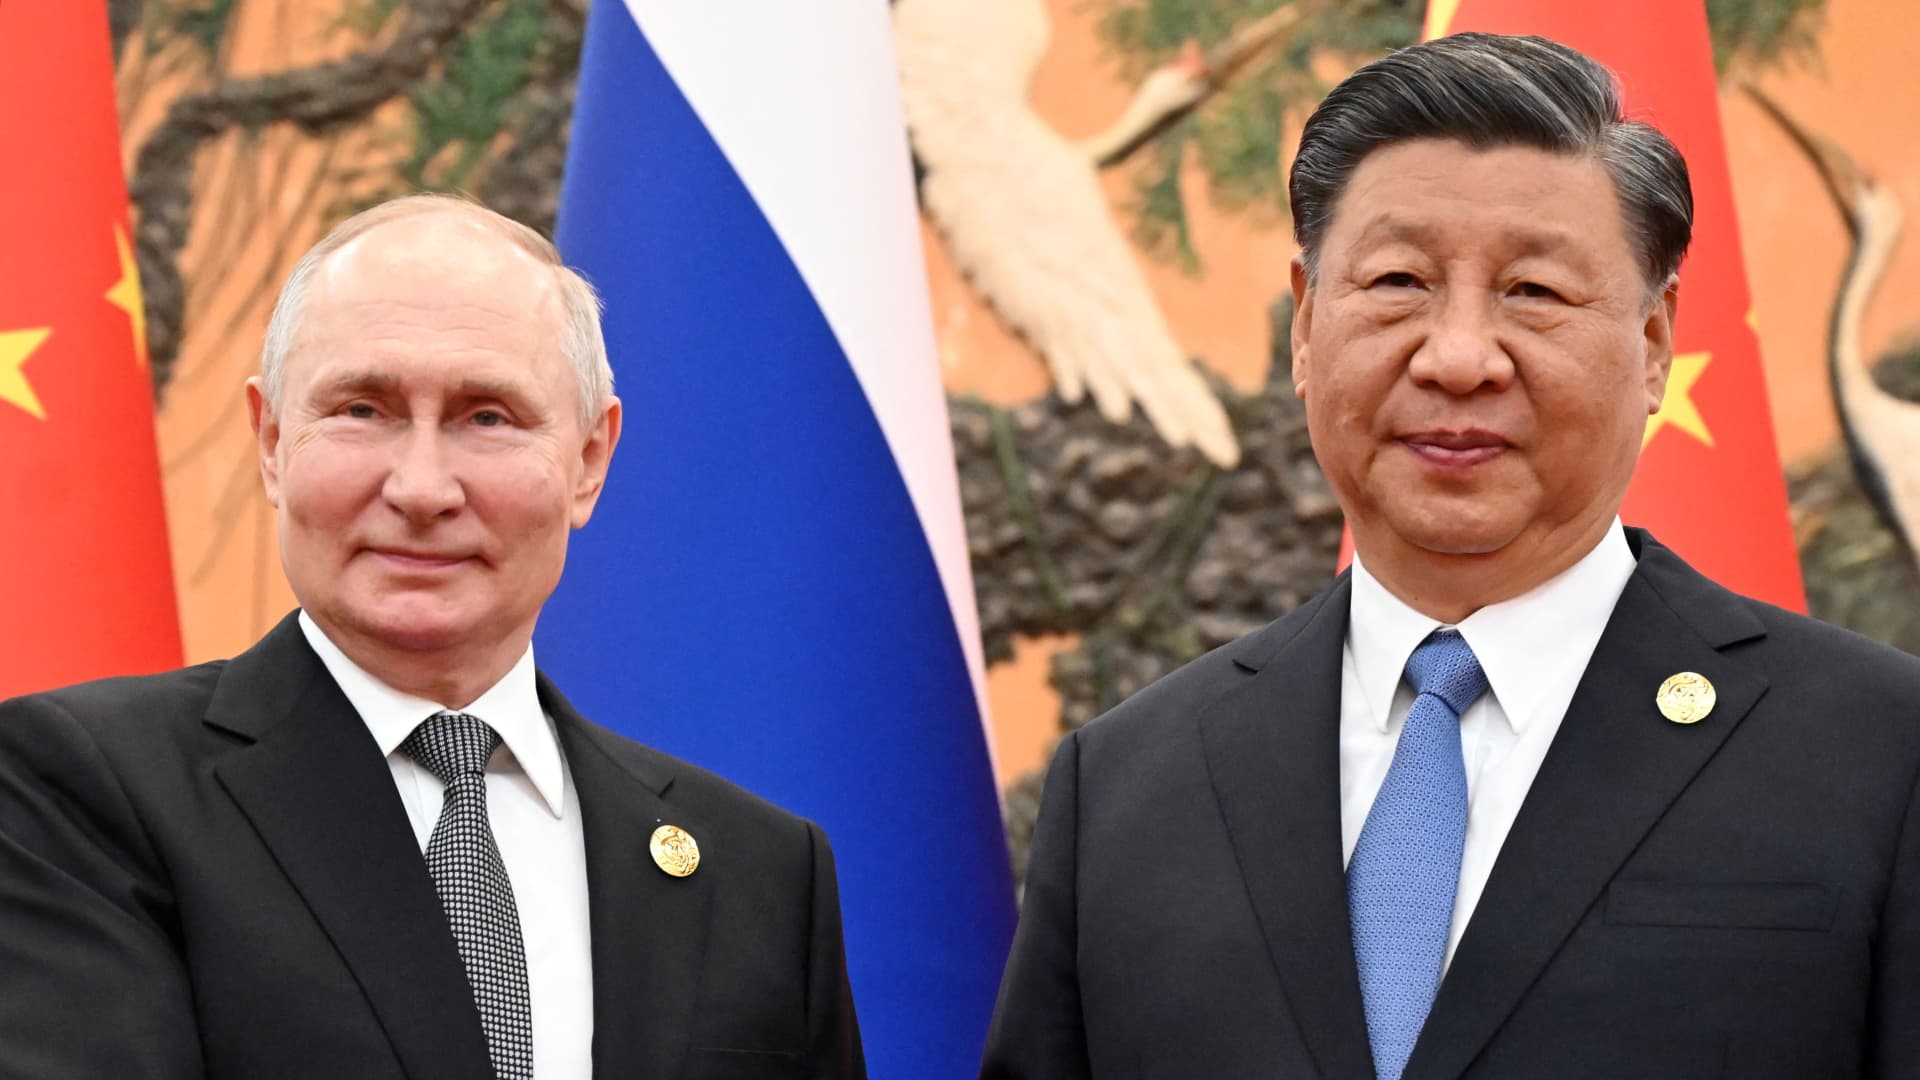 This pool photograph distributed by Russian state owned agency Sputnik shows Russia's President Vladimir Putin and Chinese President Xi Jinping posing during a meeting in Beijing on October 18, 2023.